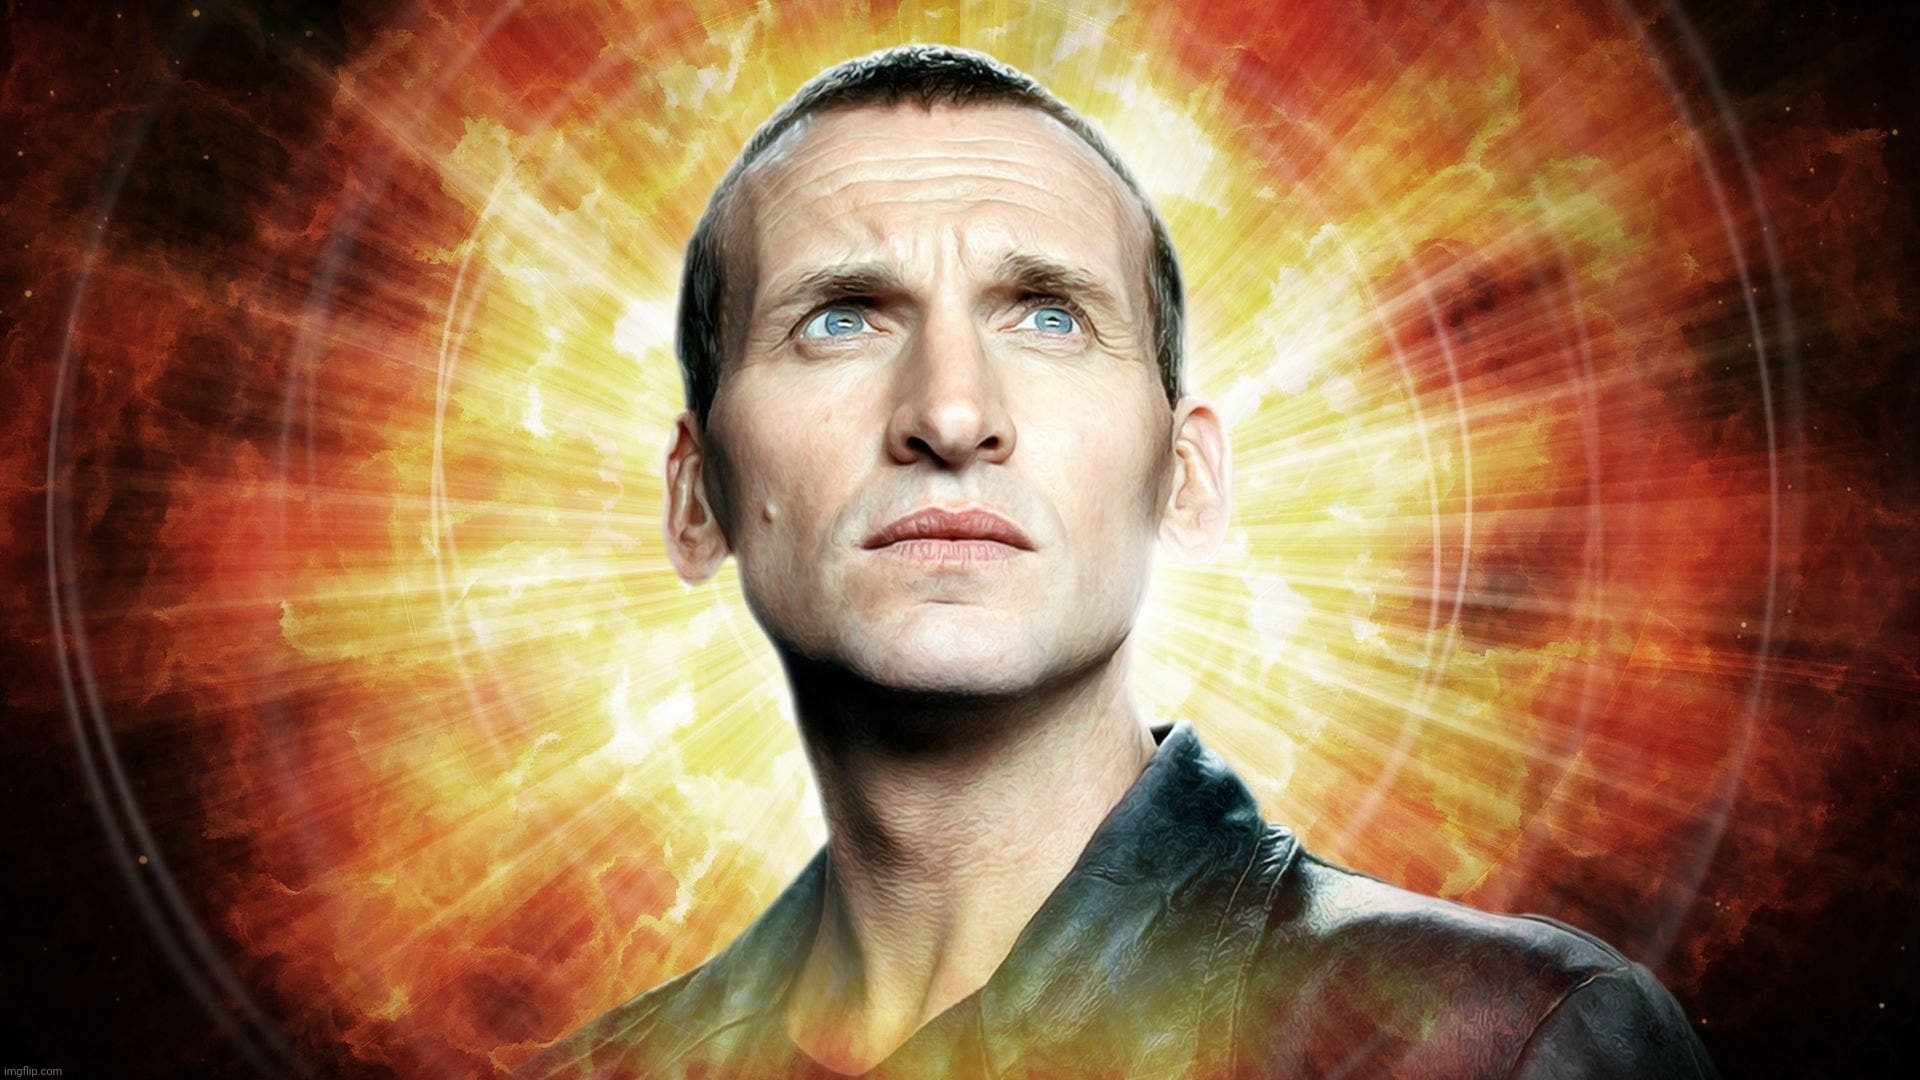 Dr Who  Chris Eccleston | image tagged in dr who chris eccleston | made w/ Imgflip meme maker